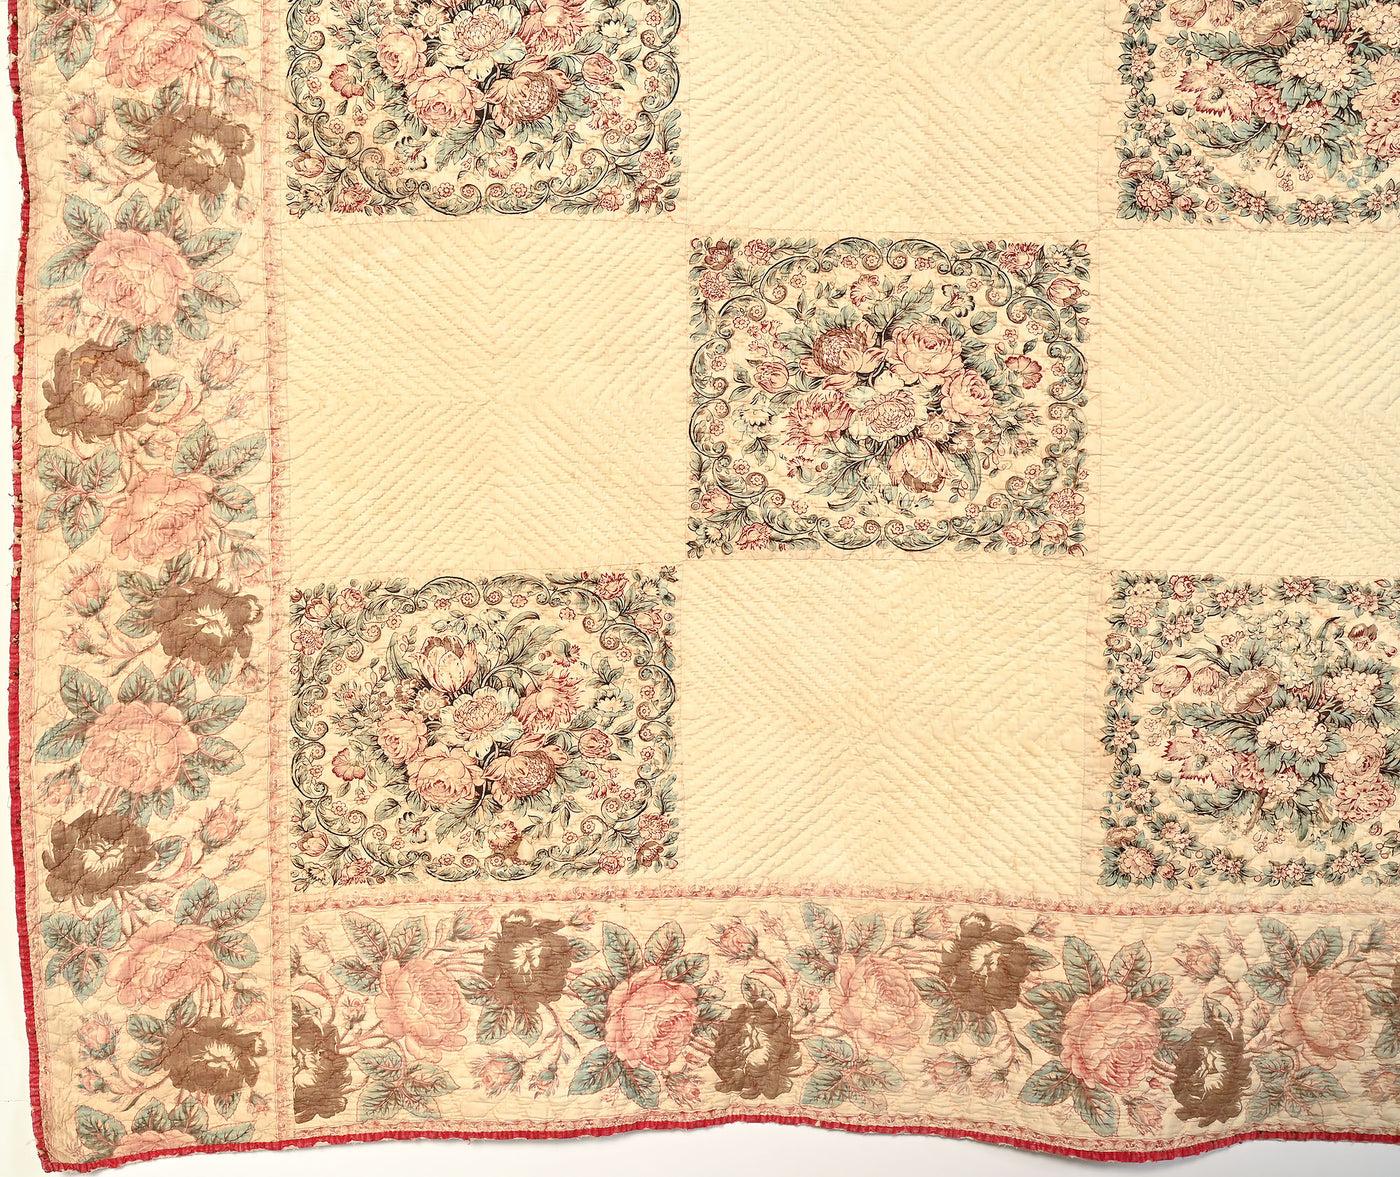 Early Chintz Quilt with Rectangular Panels